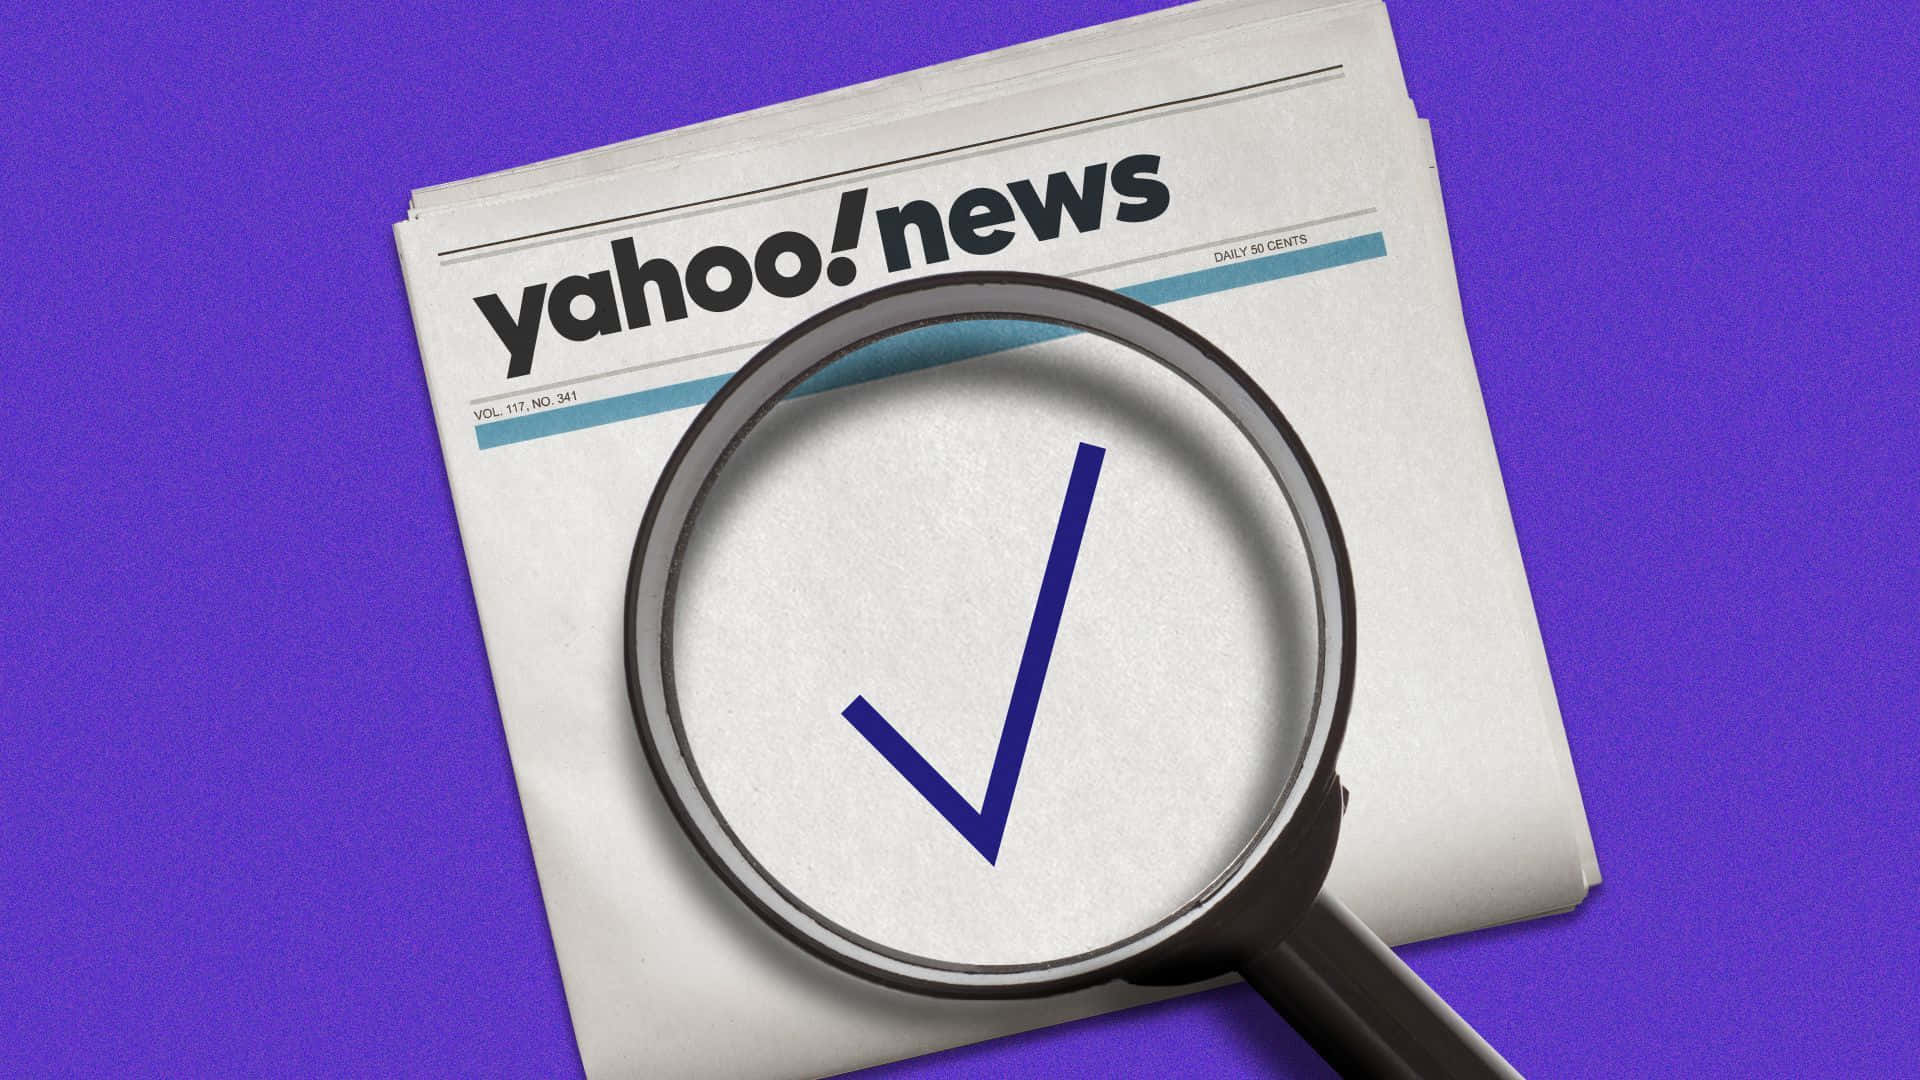 Yahoo News With A Magnifying Glass